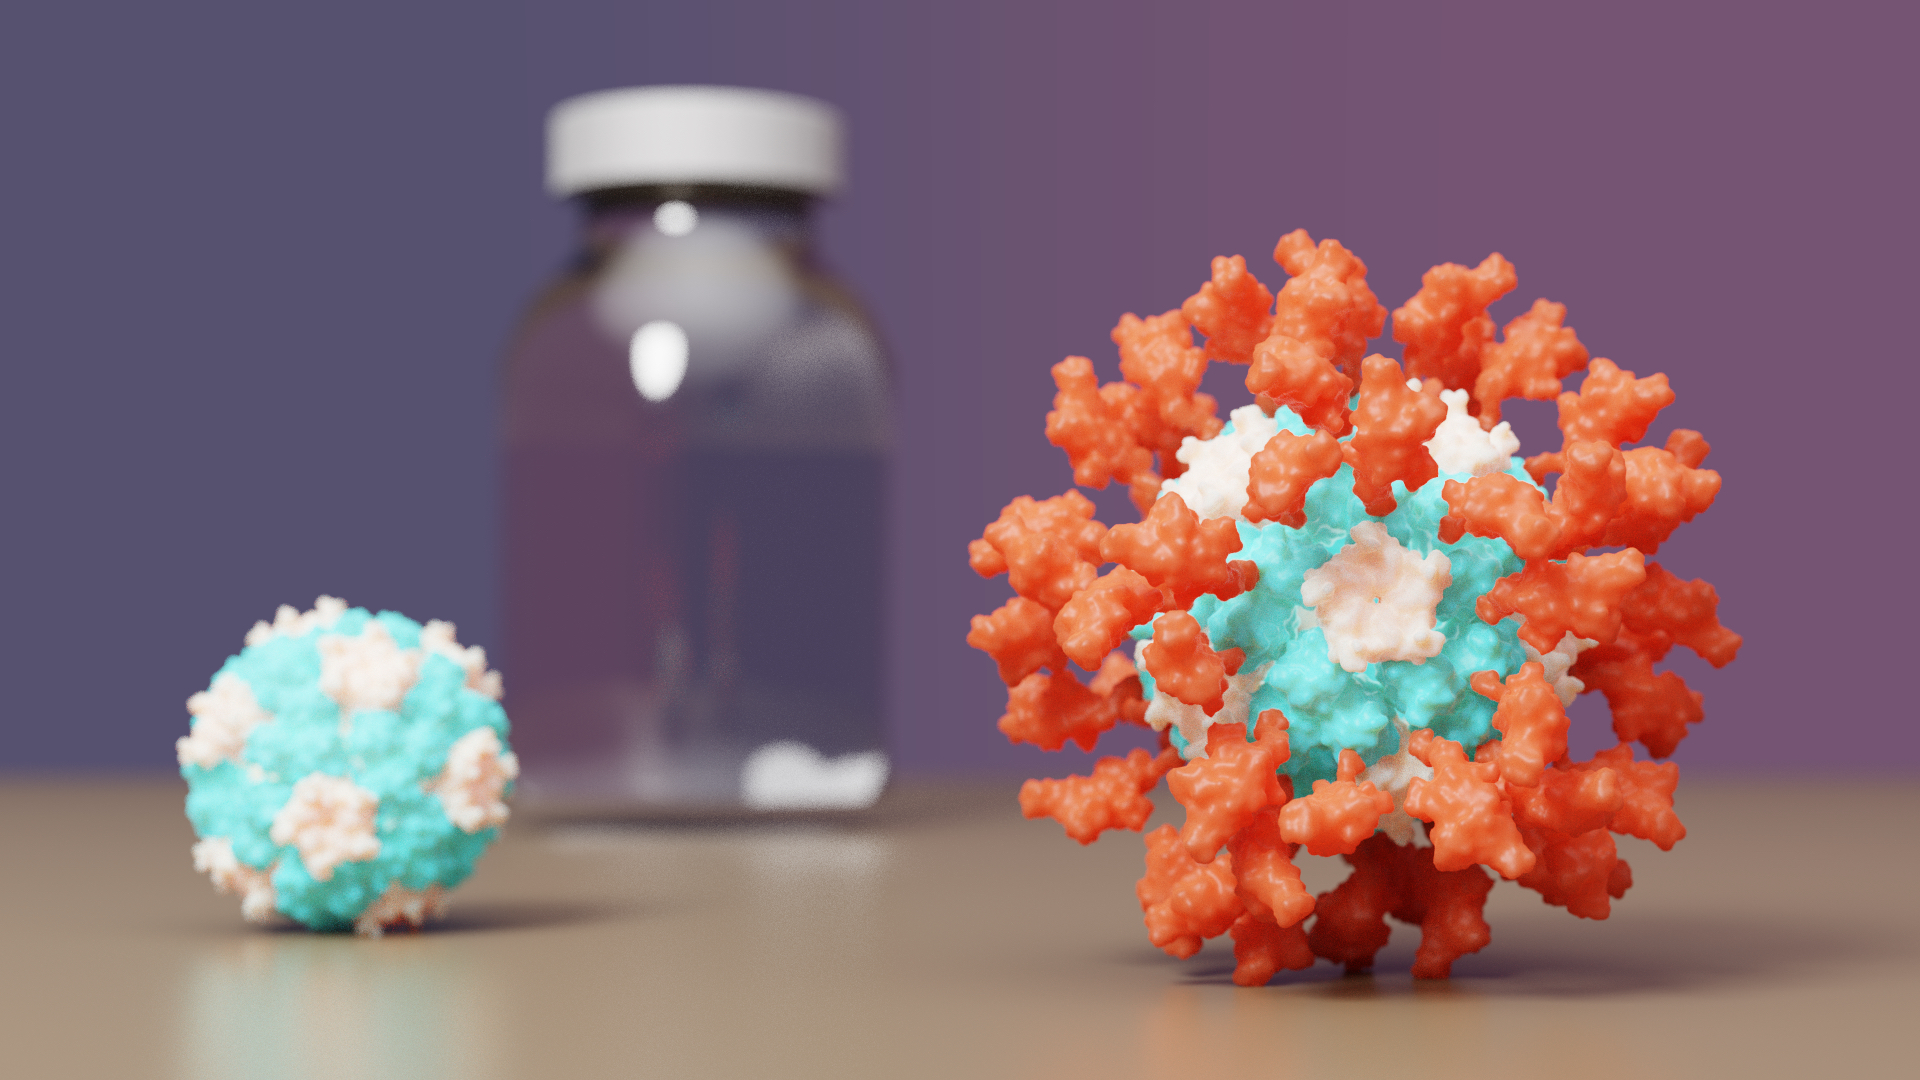 COVID-19 vaccine with IPD nanoparticles seeks full approval